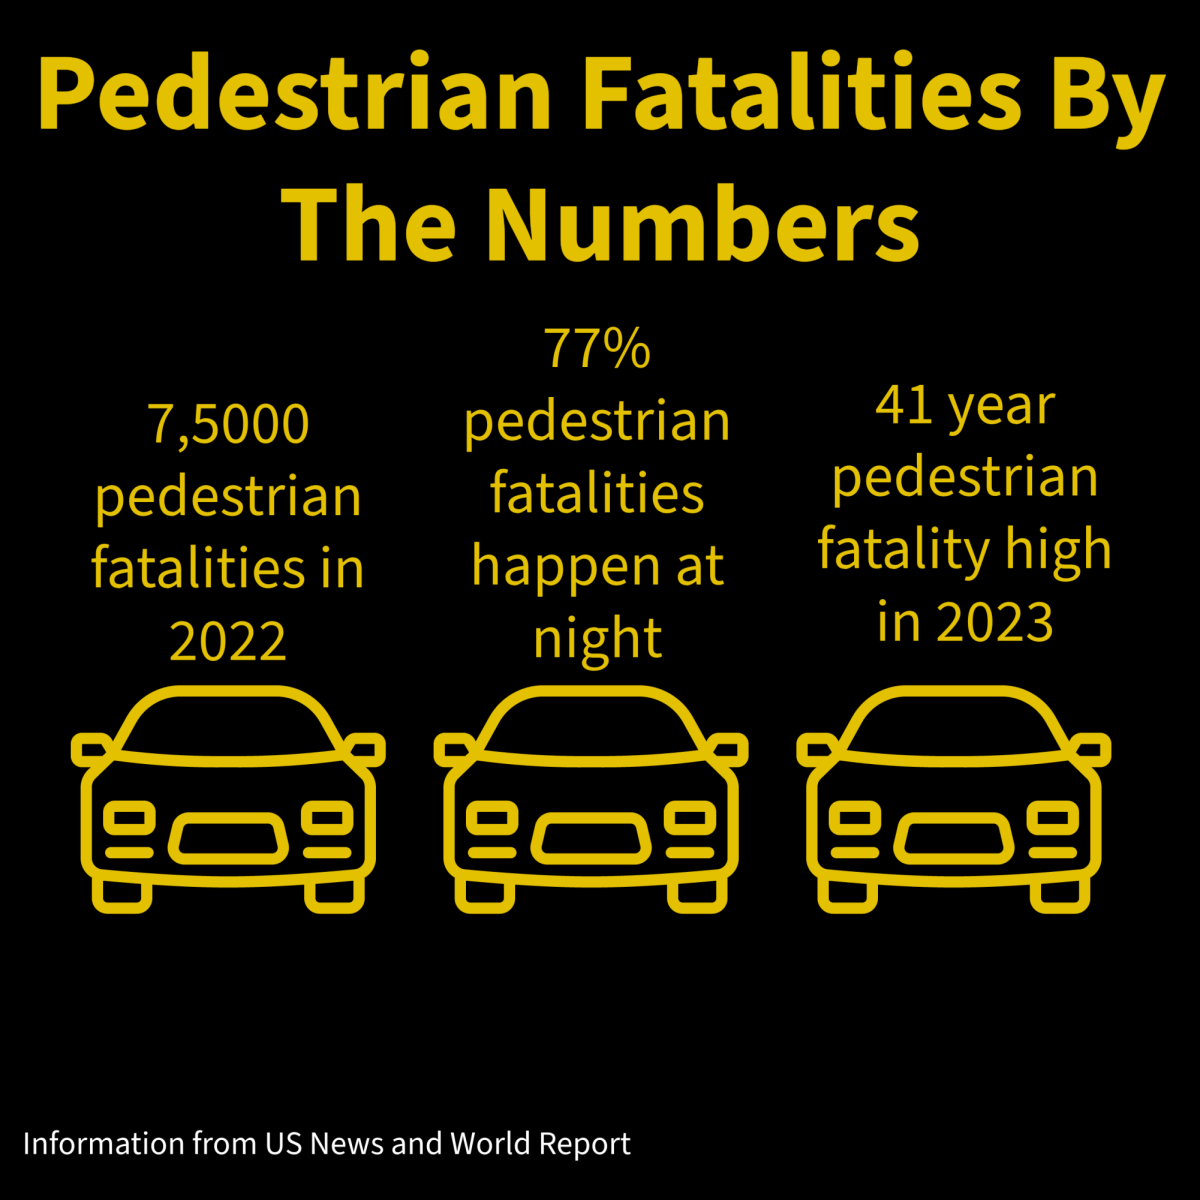 Statistics show that in recent years rates of pedestrian fatalities have risen exponentially. 